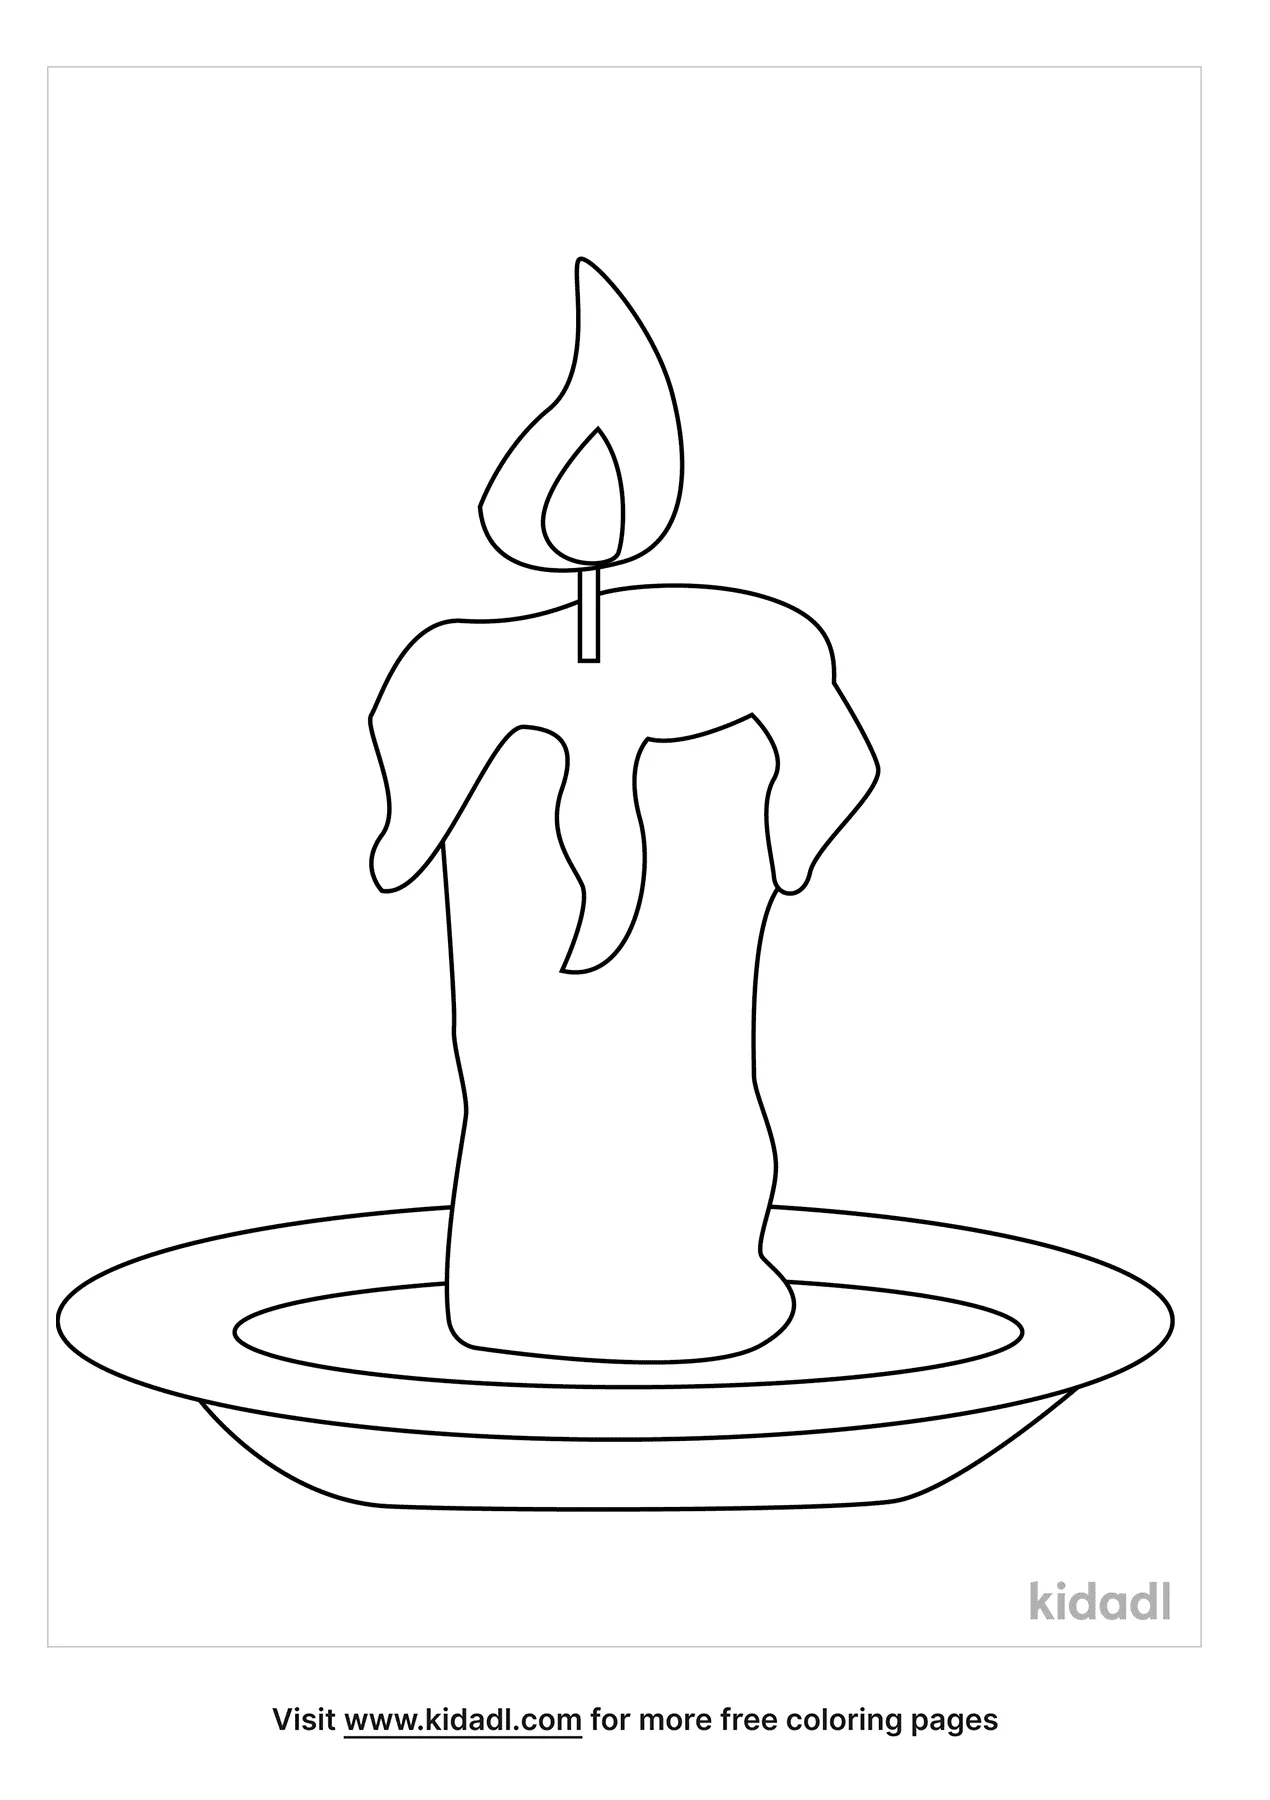 Candle On A Plate Coloring Page